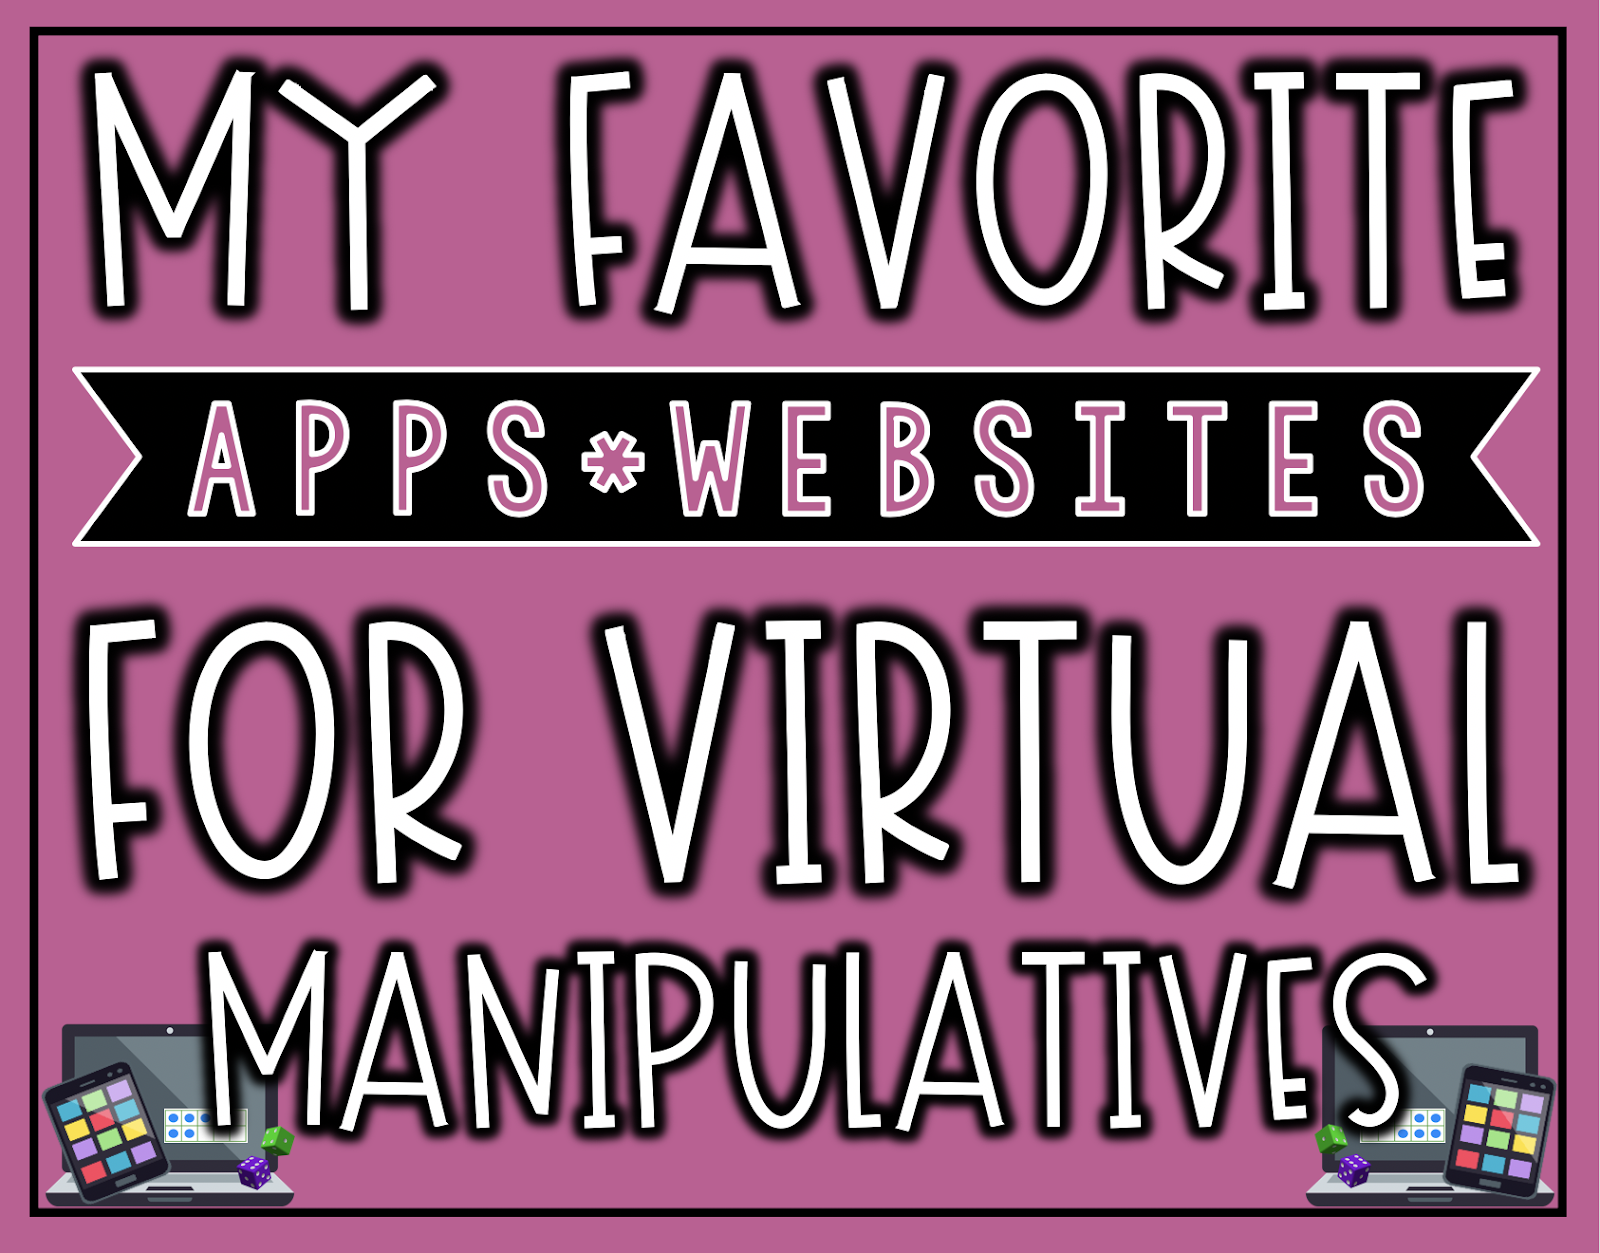 Come read about some of my favorite apps and websites for virtual manipulatives. There are free digital tools for iPads, Chromebook and computer users available in this post.